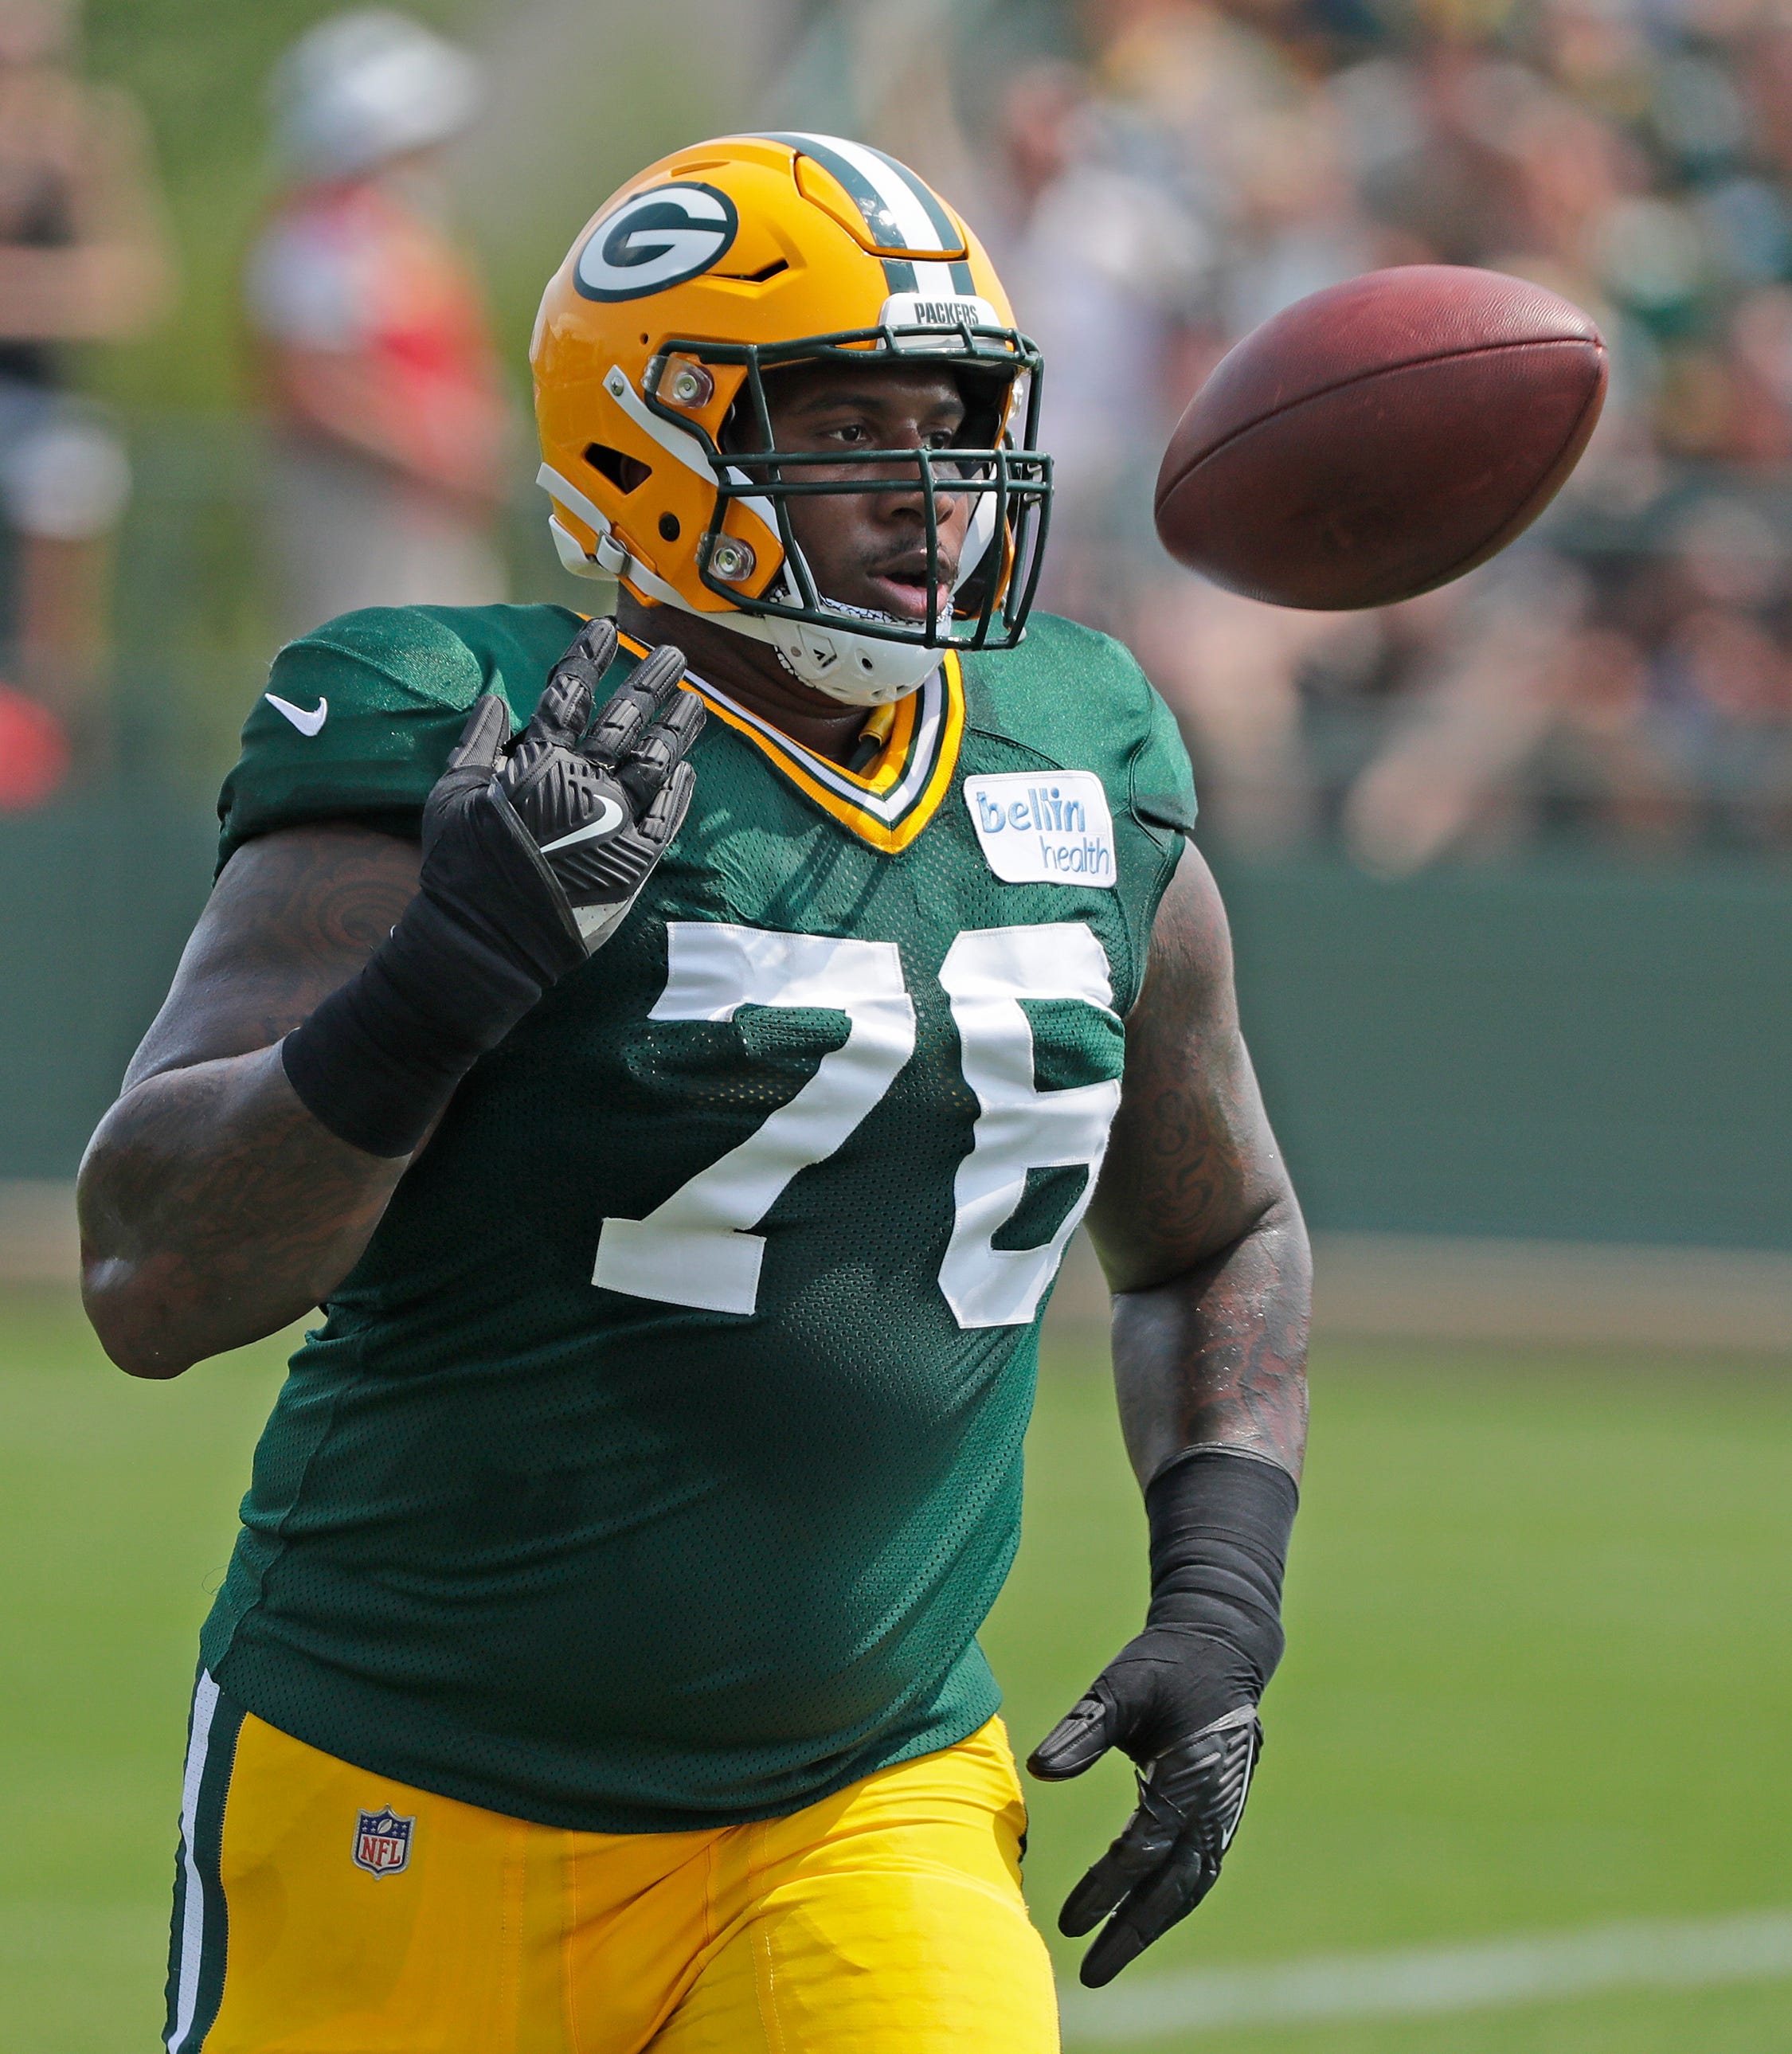 Green Bay Packers defensive tackle Mike Daniels (76) runs through ball drills during training camp practice at Ray Nitschke Field on Sunday, August 12, 2018 in Ashwaubenon, Wis. 
Adam Wesley/USA TODAY NETWORK-Wisconsin